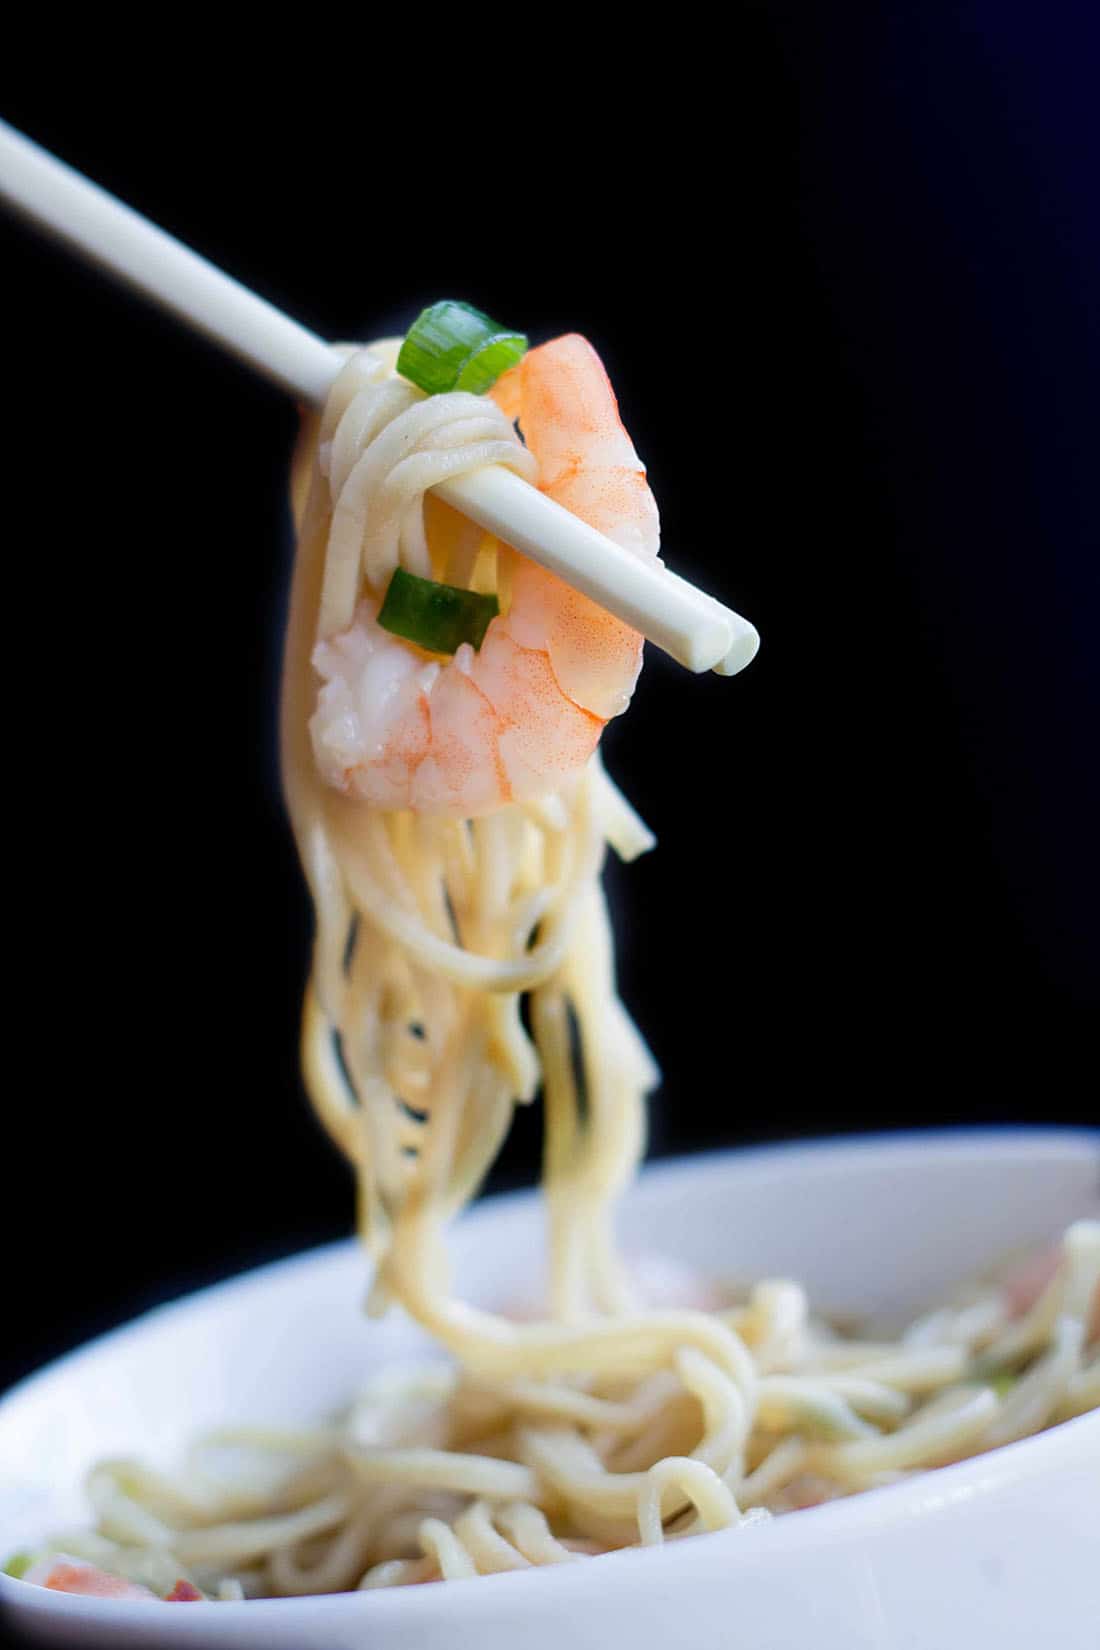 Chopsticks holding noodles and a whole shrimp from the soup